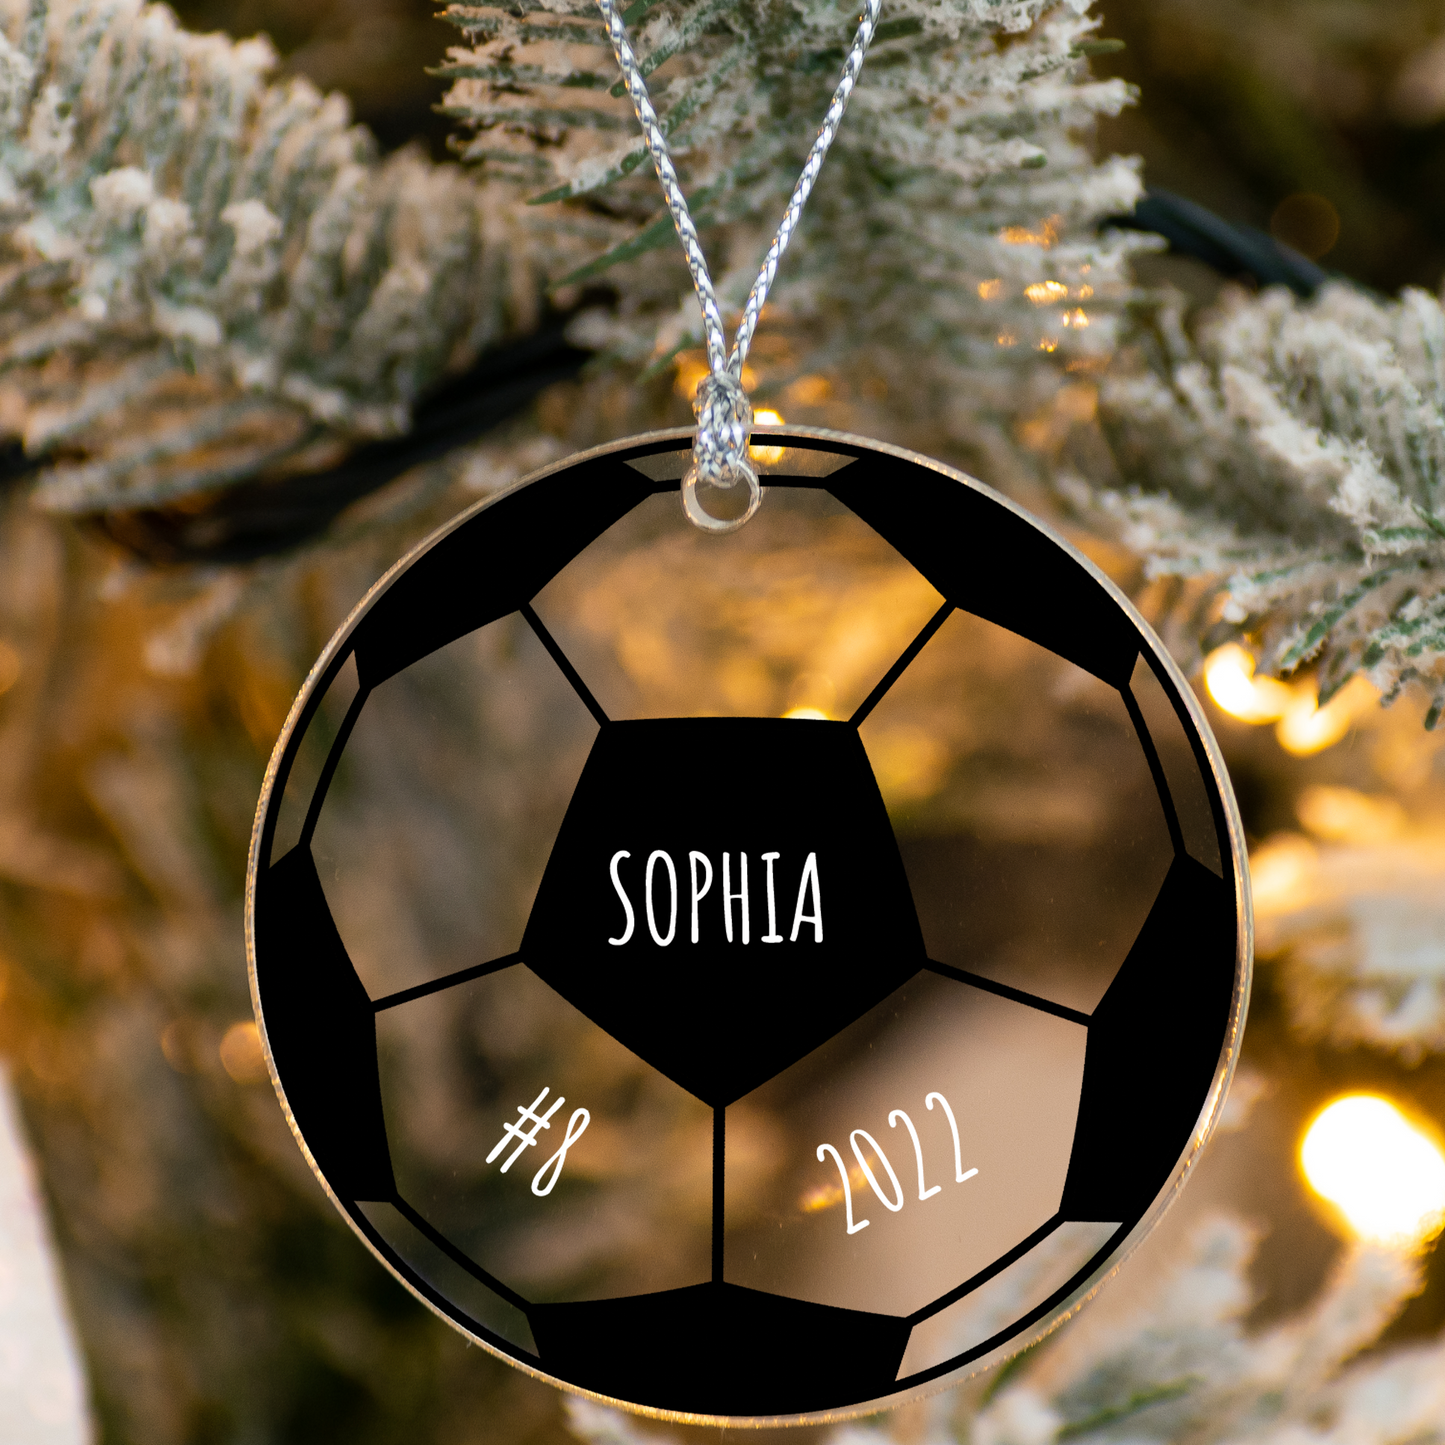 Soccer Ball Ornament with Personalized Engraved Name